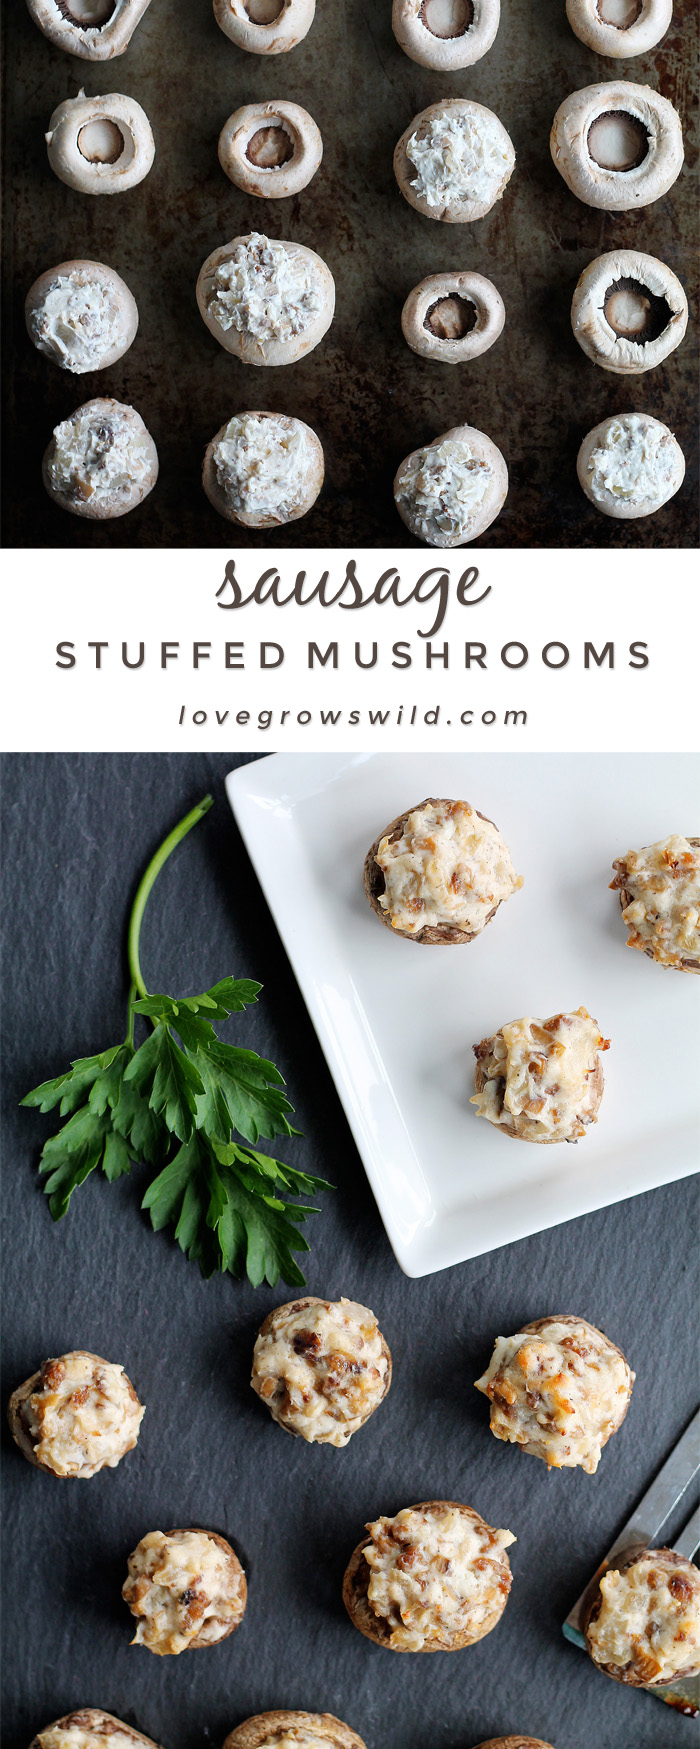 Creamy, delicious Sausage Stuffed Mushrooms make the perfect party appetizer!  Get the recipe for these savory little bites of heaven at LoveGrowsWild.com